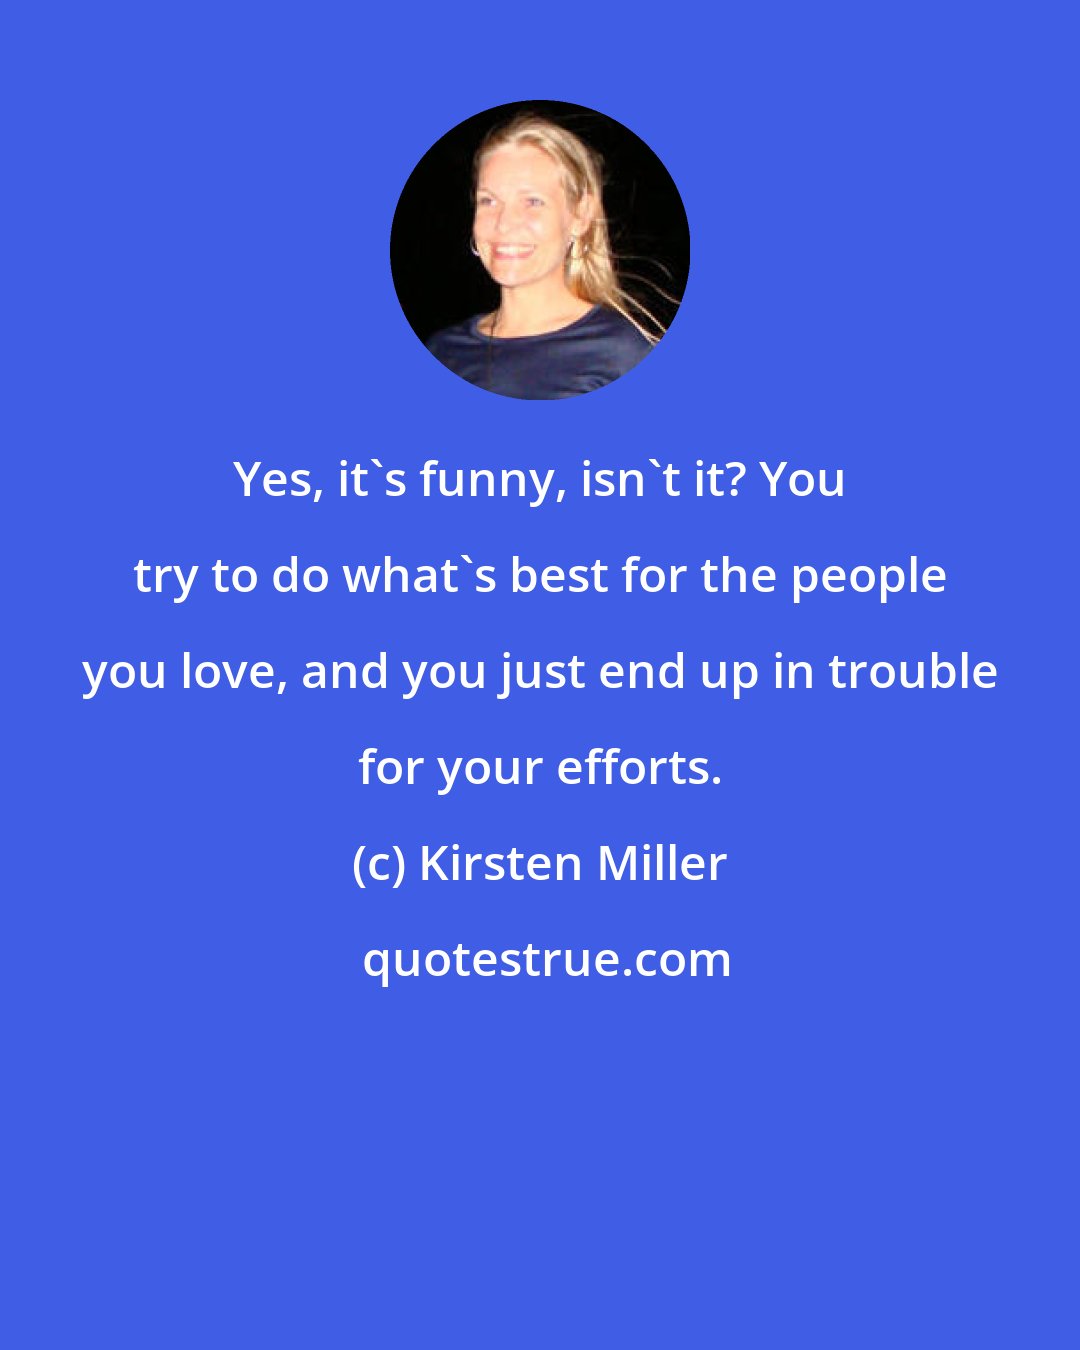 Kirsten Miller: Yes, it's funny, isn't it? You try to do what's best for the people you love, and you just end up in trouble for your efforts.